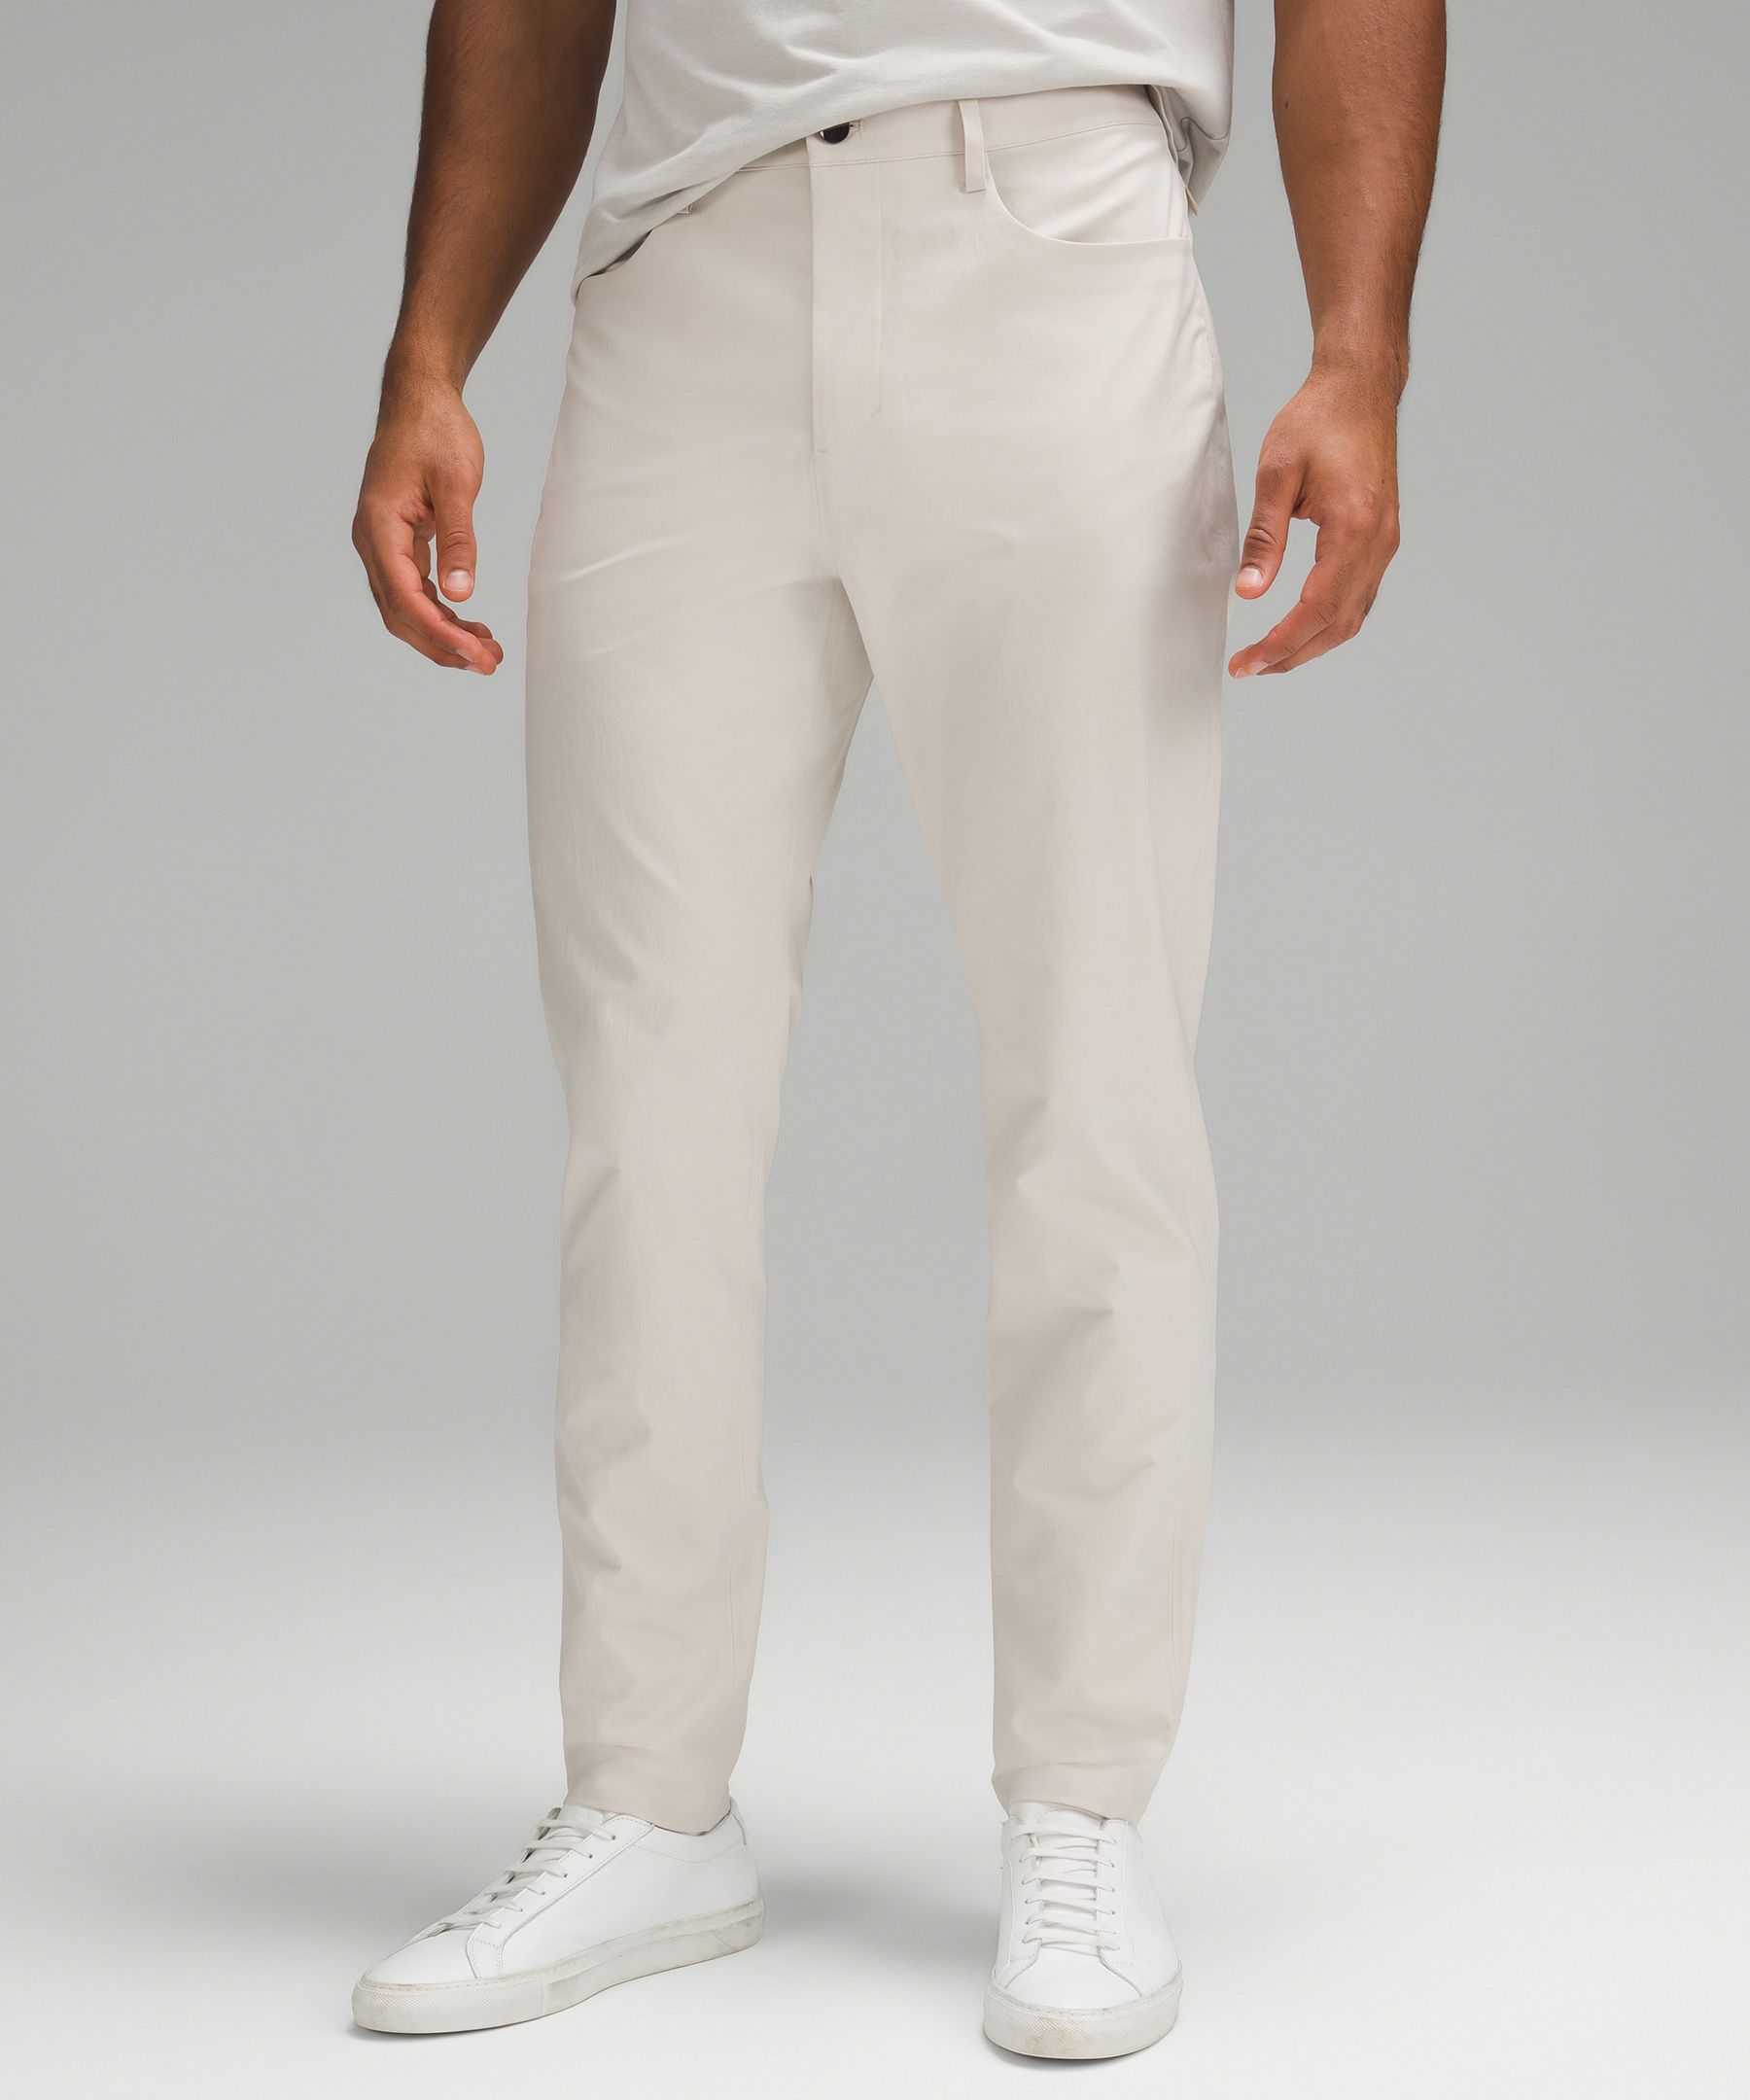 Bonded Active Pant